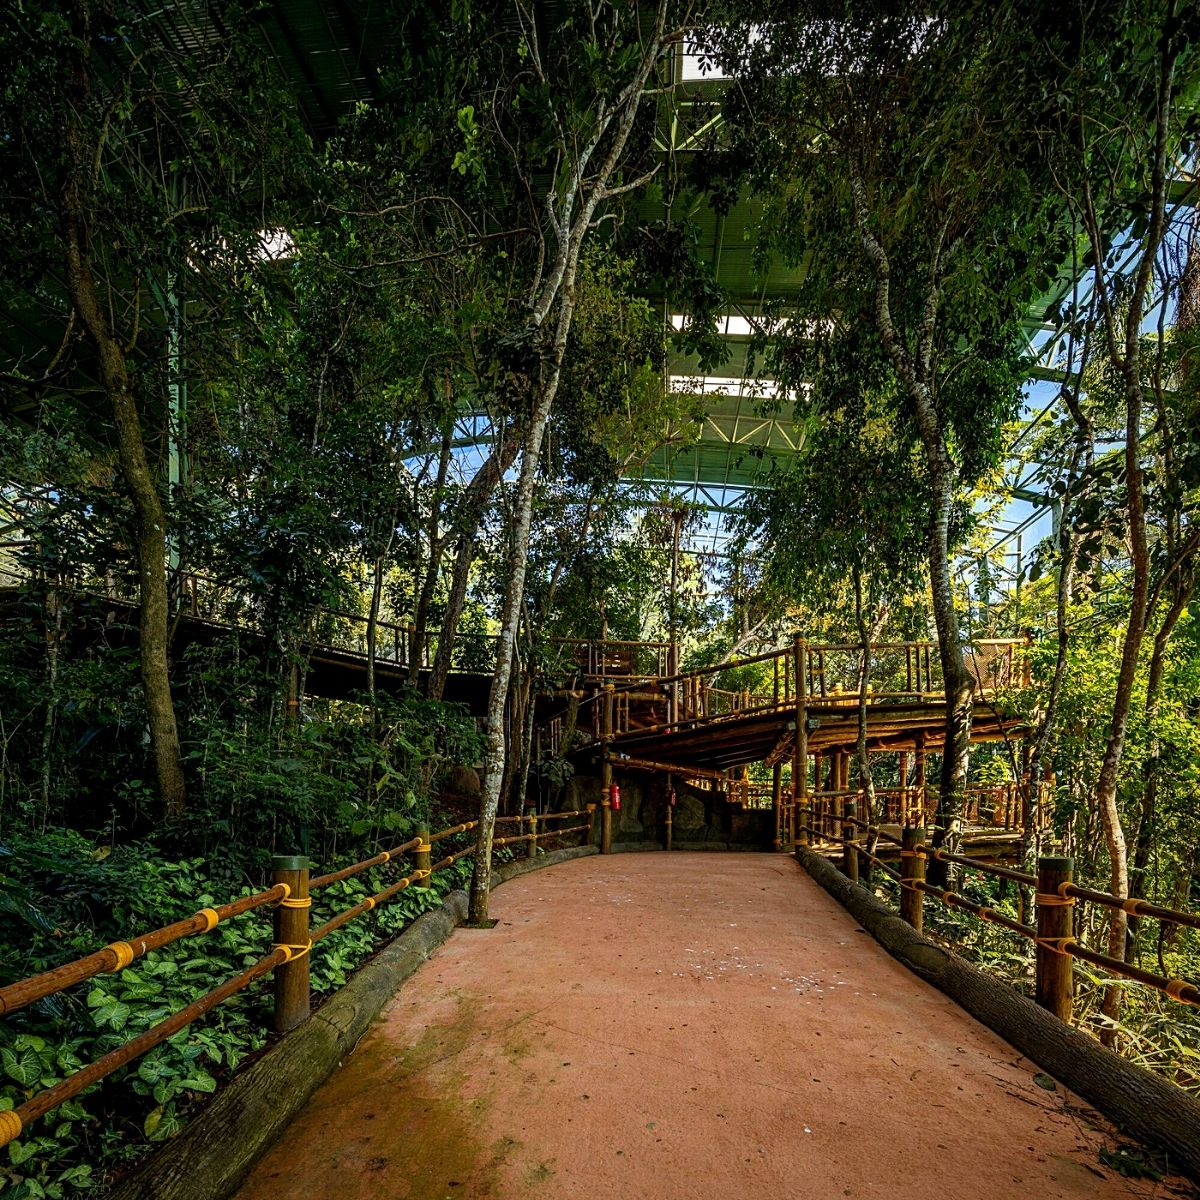 ​Animalia Park offers an immersive experience ​with fauna in nature